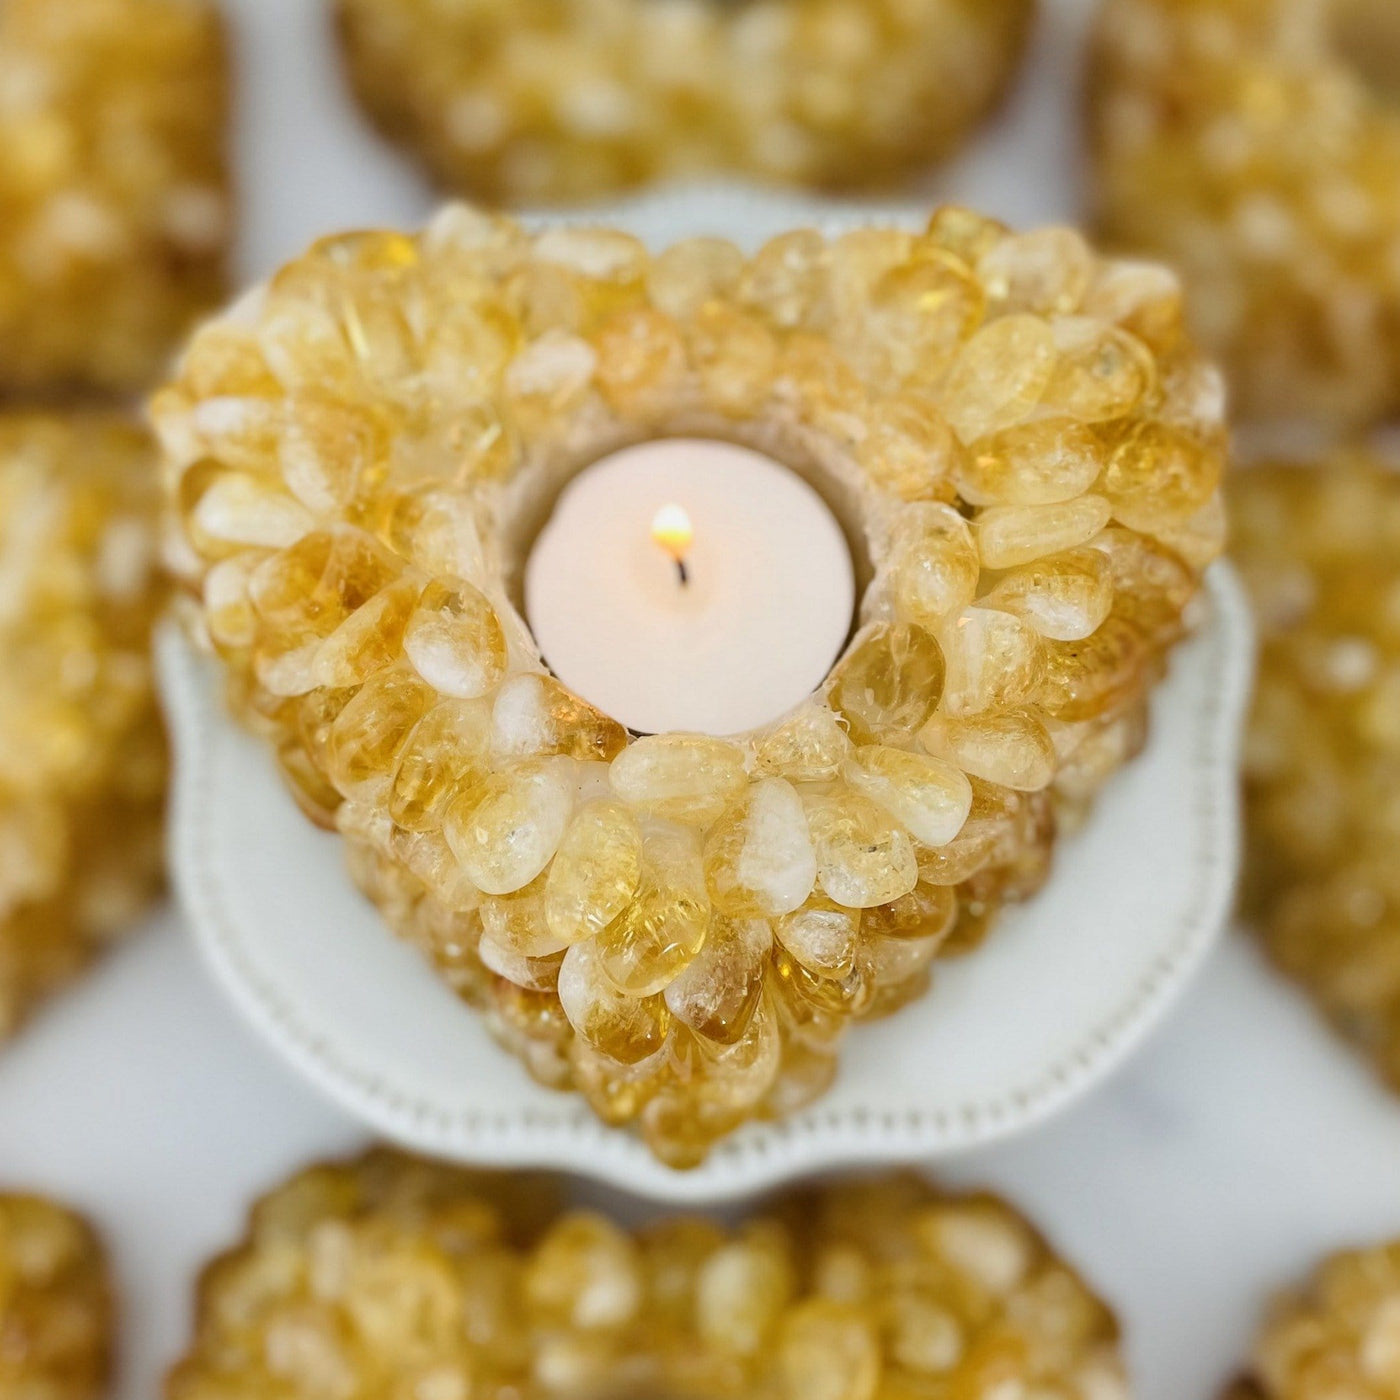 Citrine Tumbled stone Heart Candle Holder shown from overtop with a candle with others in the background